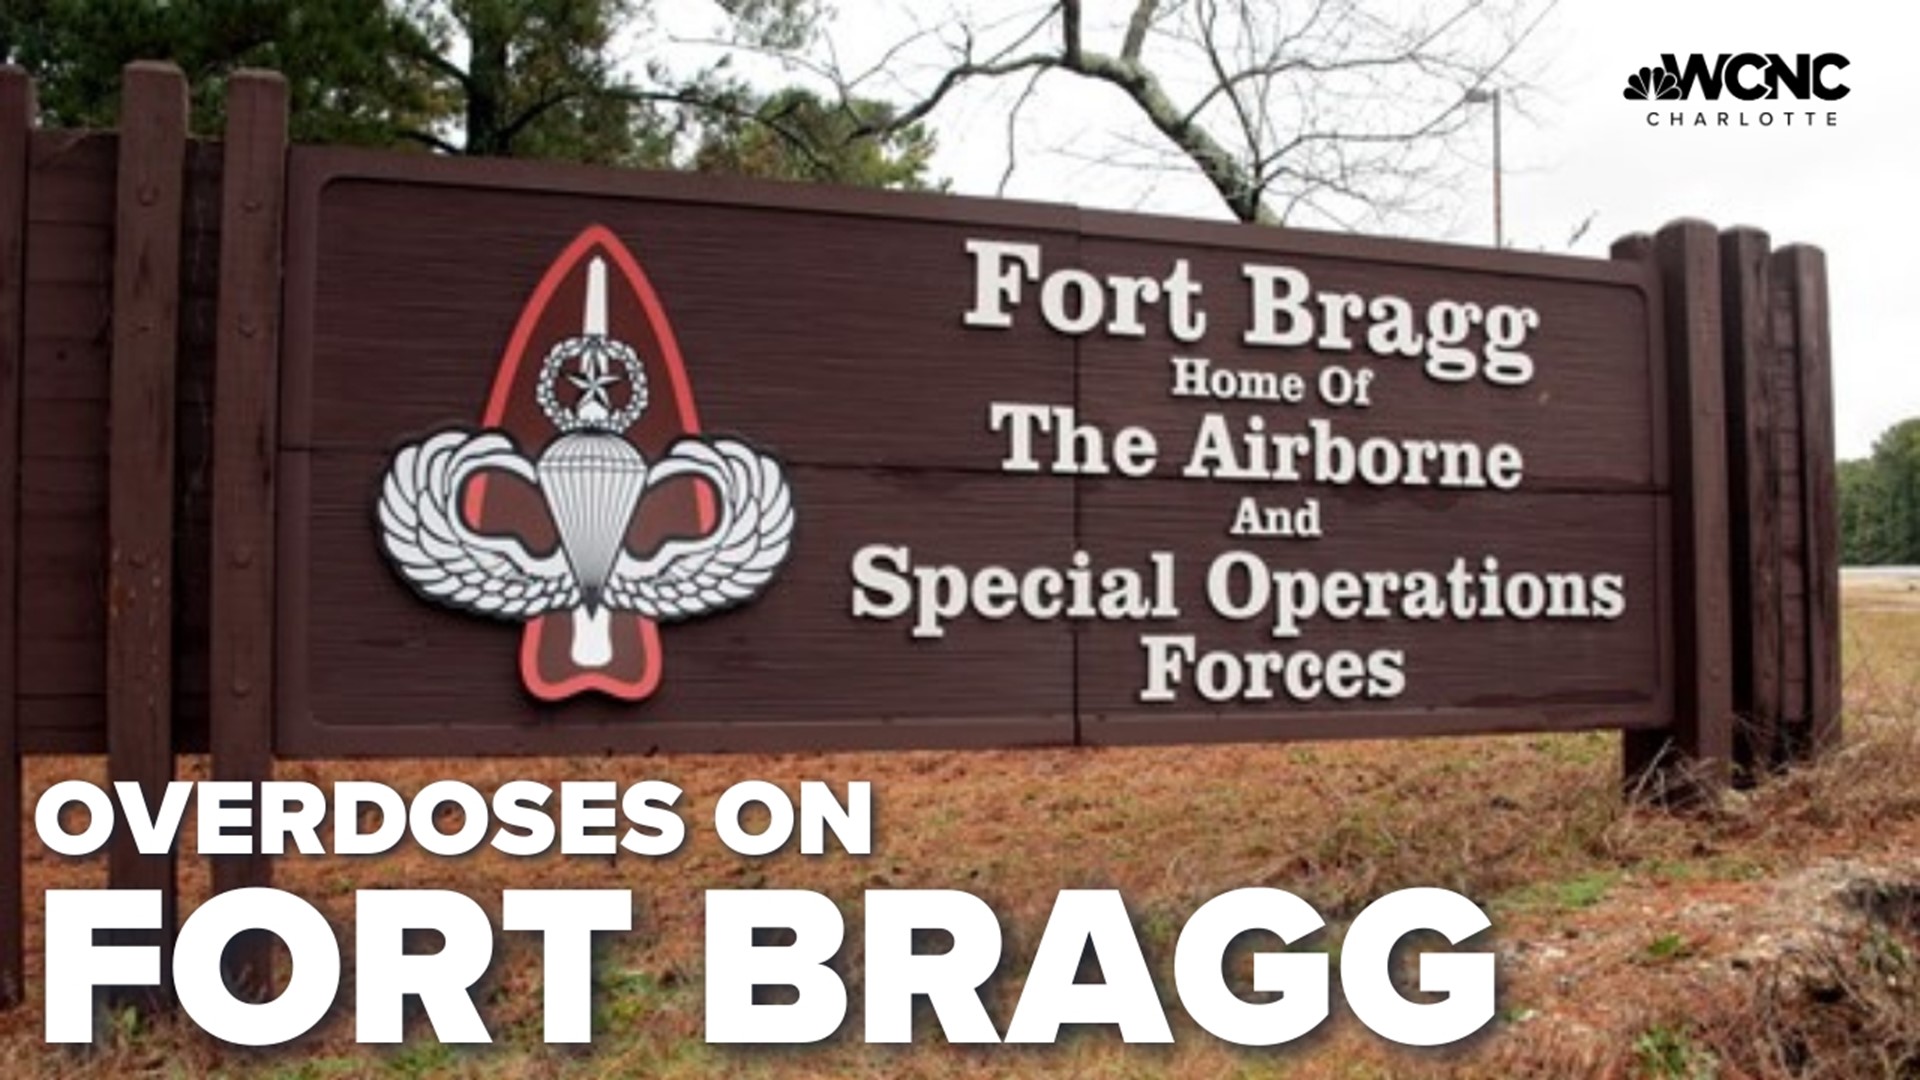 Fort Bragg suffered more fatal overdoses from 2017 to 2021 than any other military base, according to data recently published by the Department of Defense.